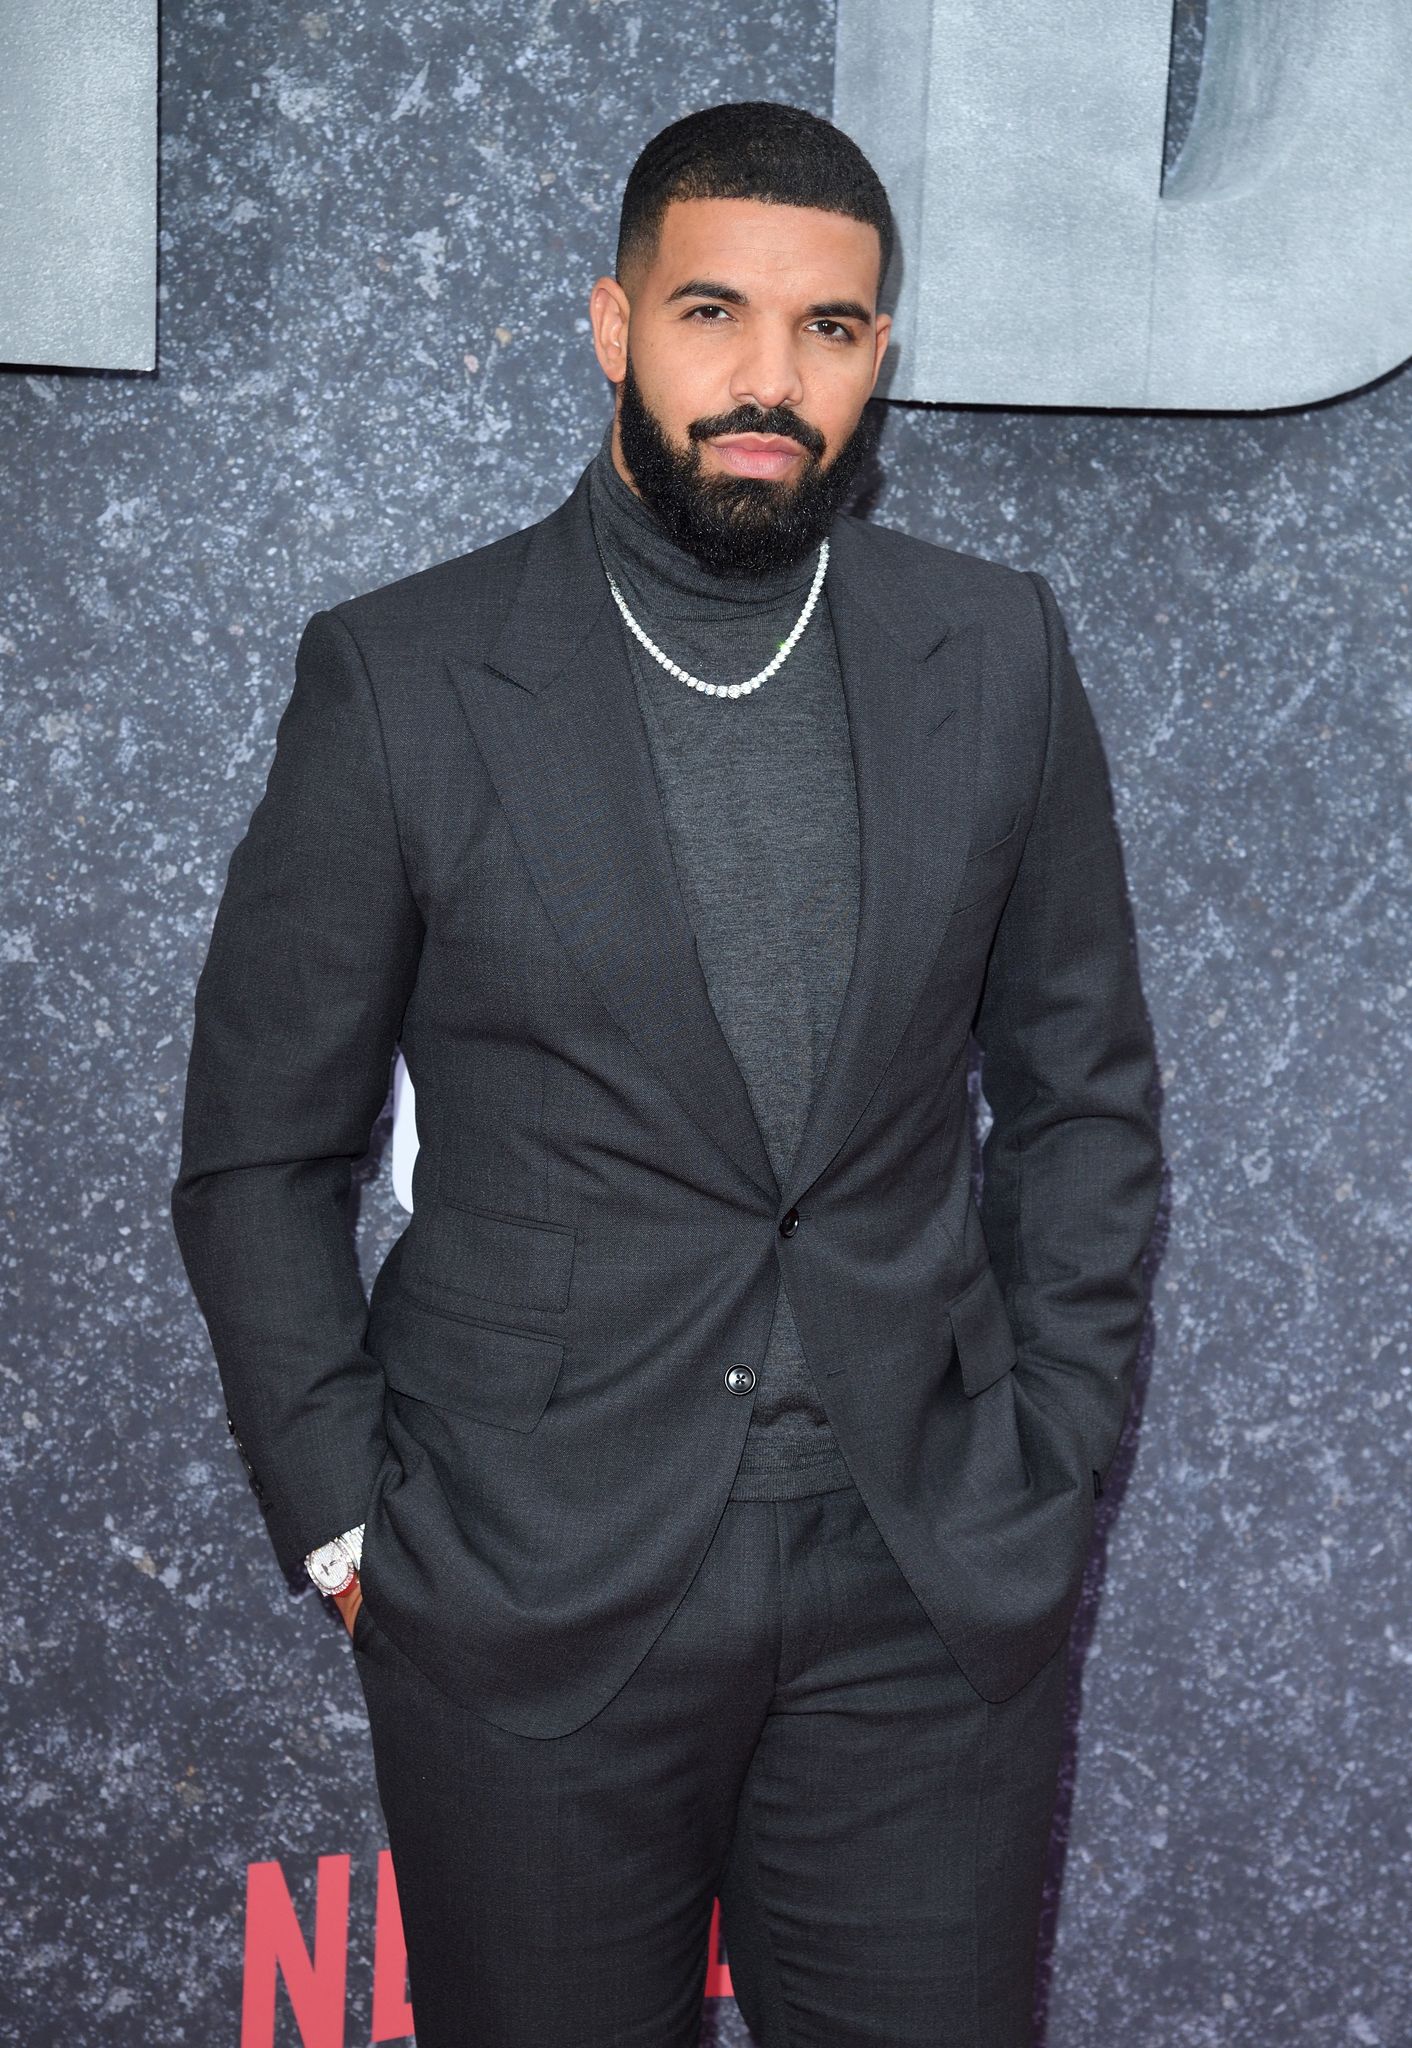 Drake at the premiere of "Top Boy" in September 2019 in London, England | Source: Getty Images